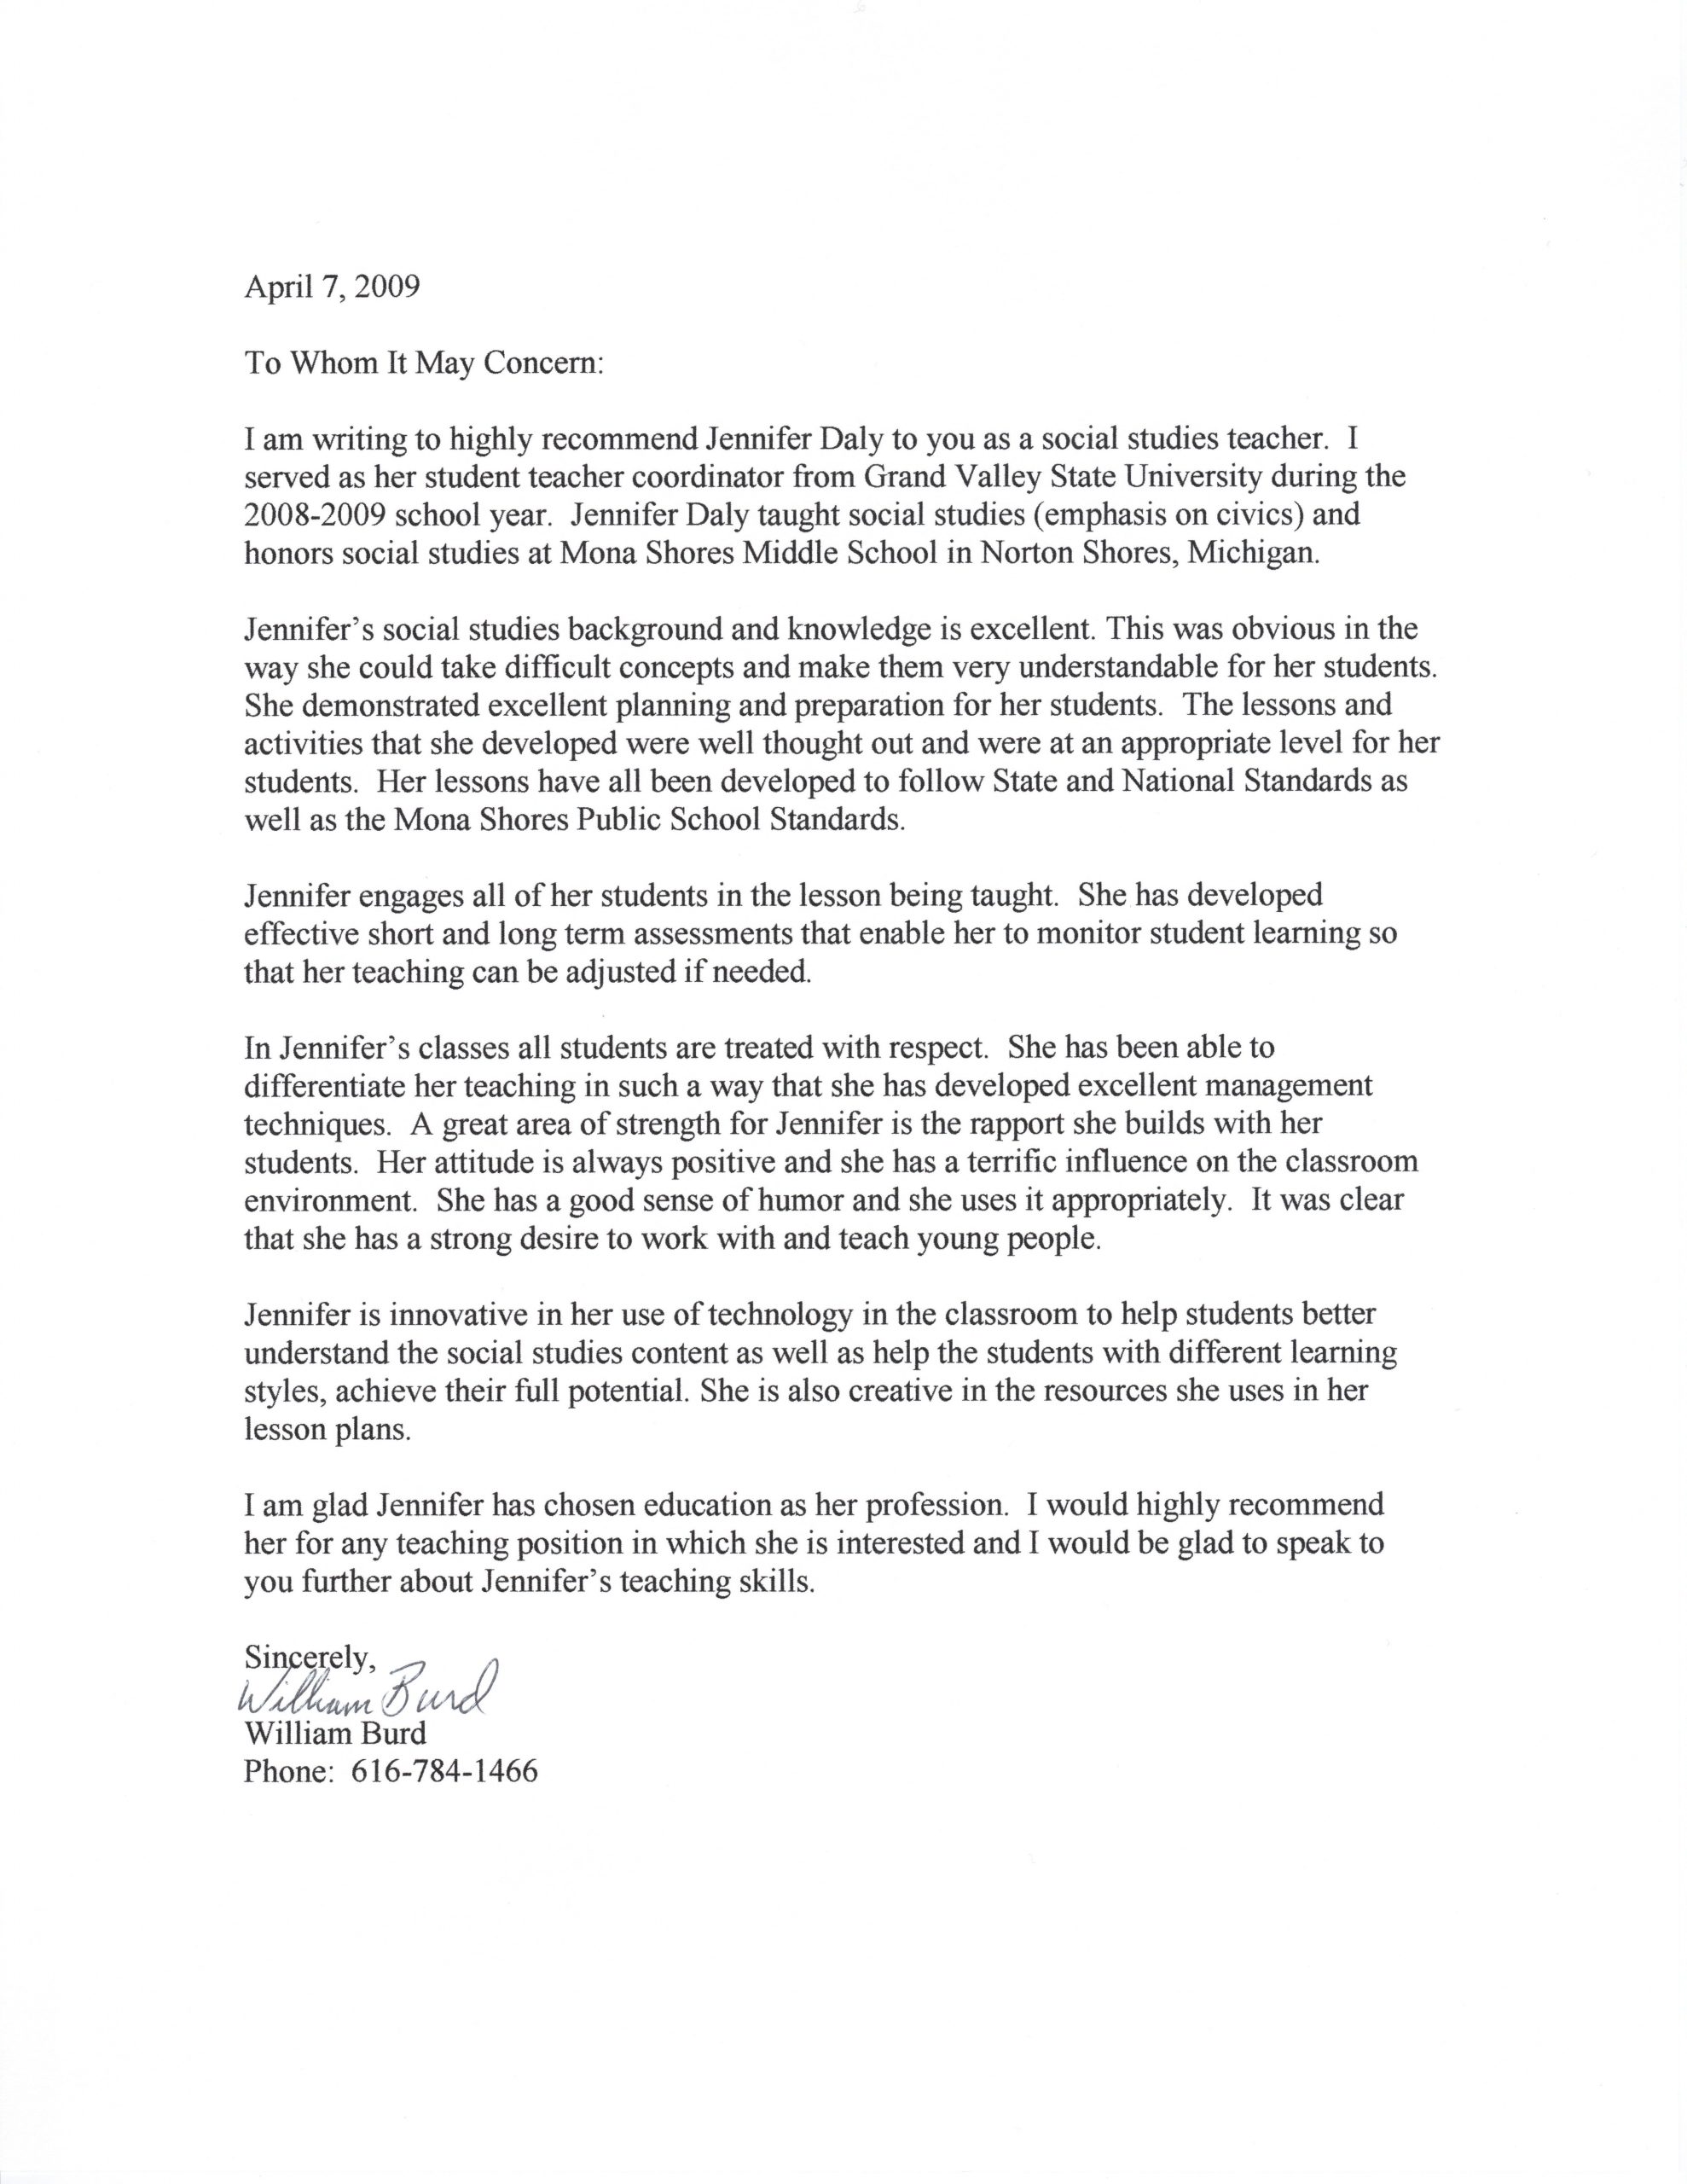 Tenure Recommendation Letter From Student Example Debandje inside size 5100 X 6600